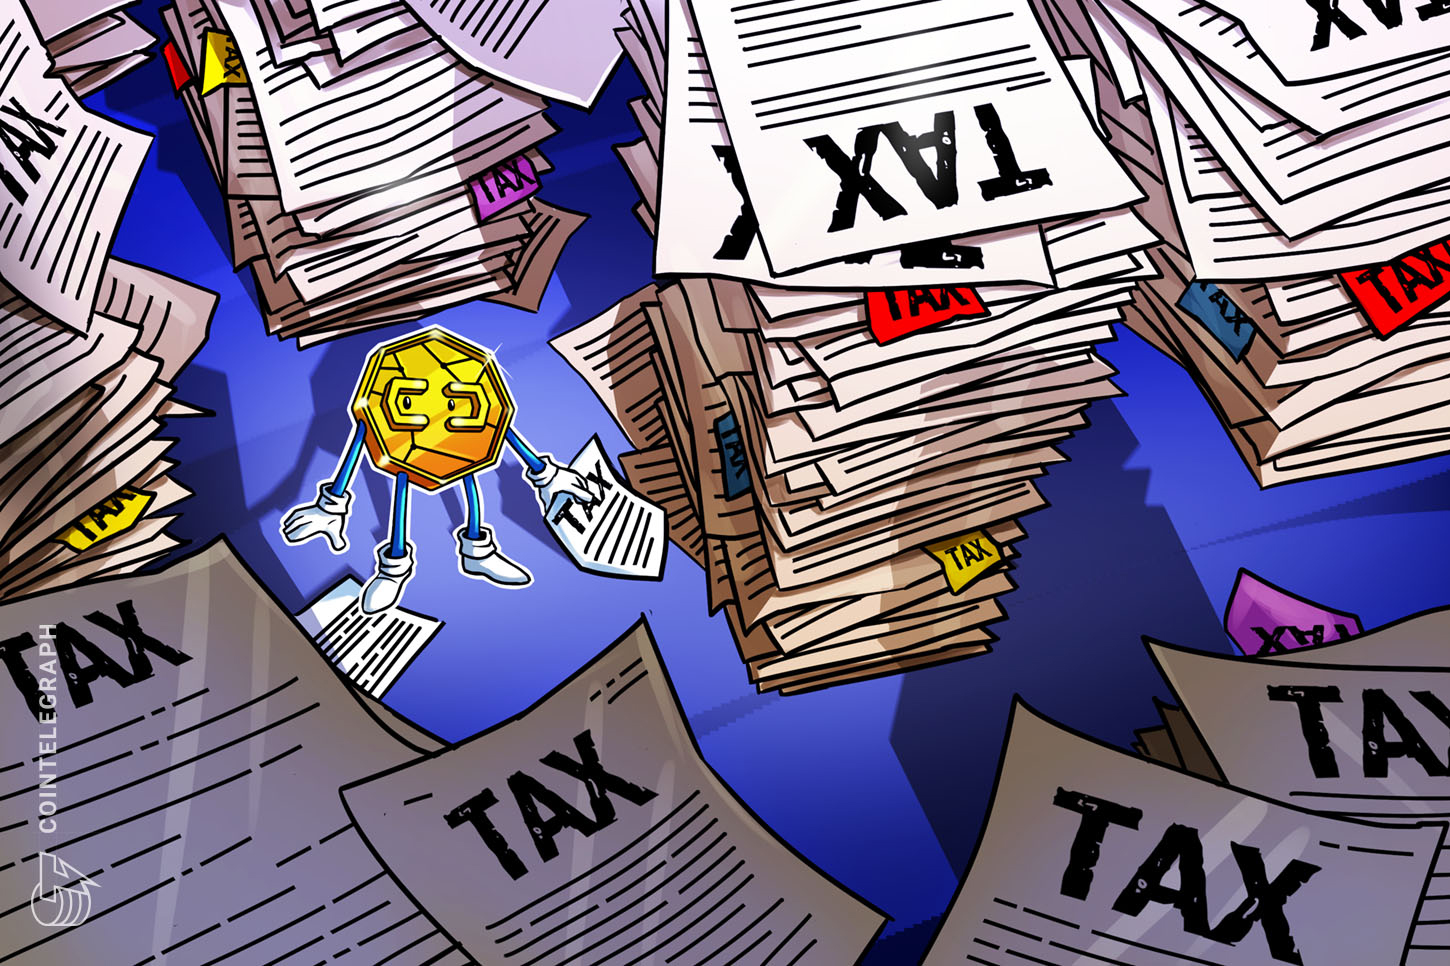 South Korea Finalizes Cryptocurrency Earnings Tax of 20%